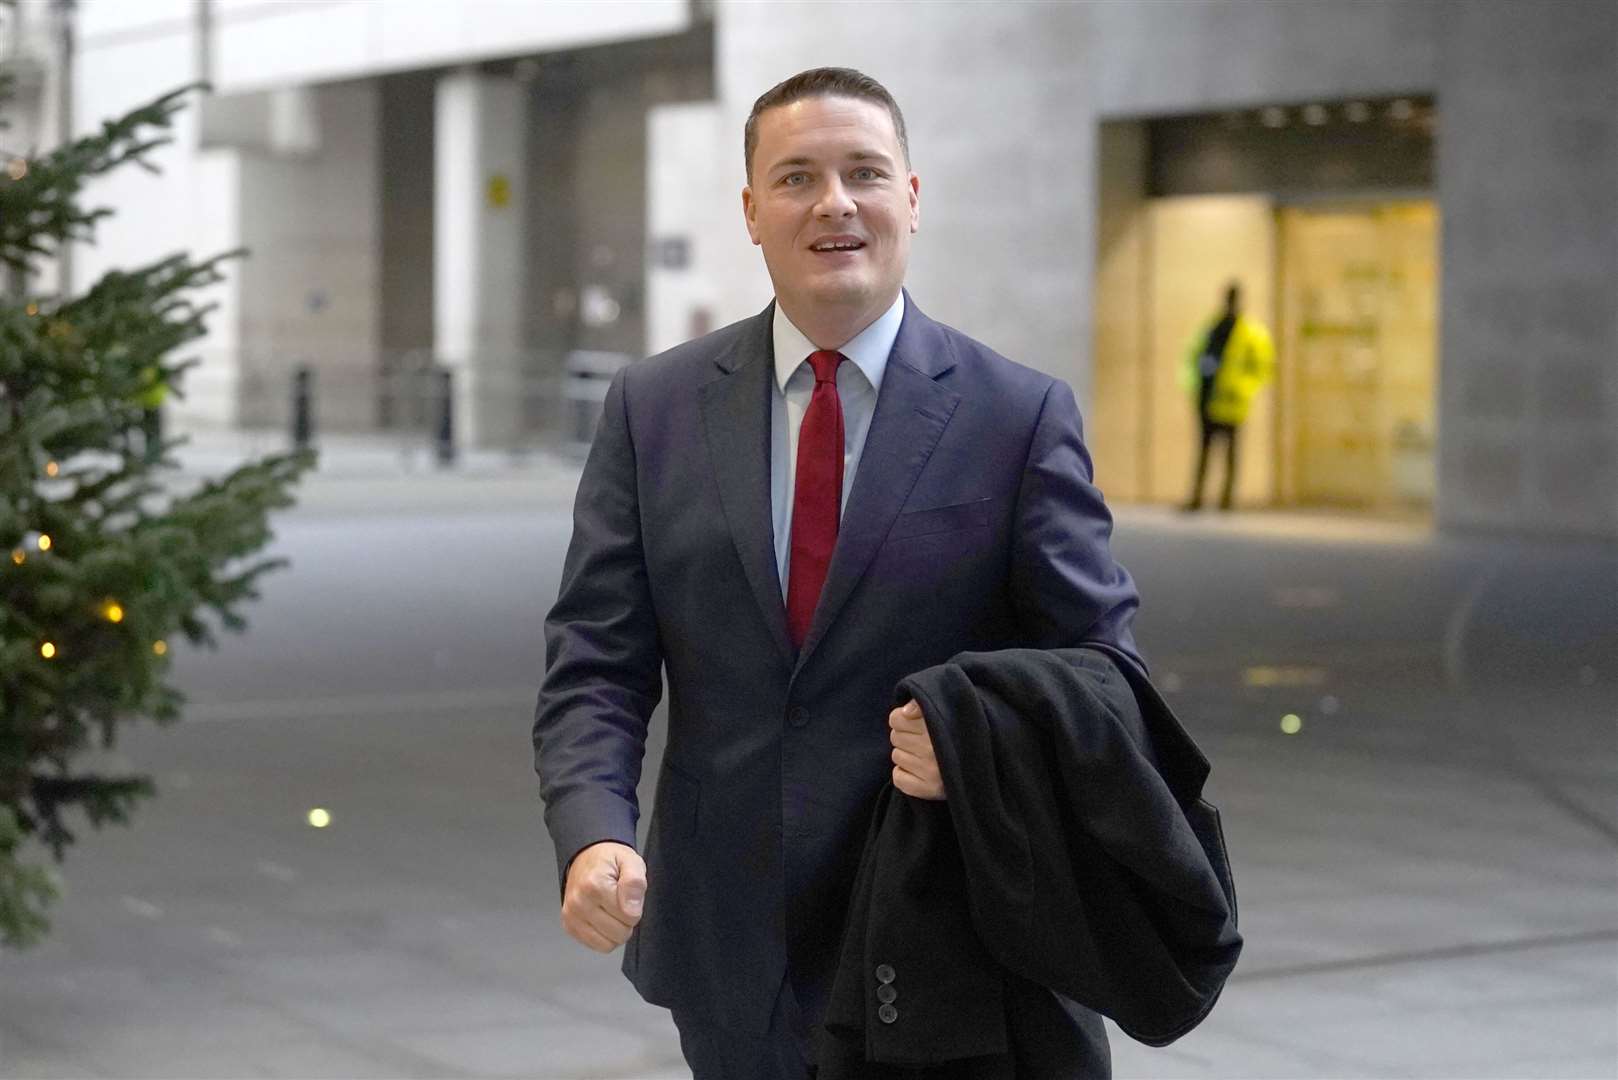 Shadow health secretary Wes Streeting at BBC Broadcasting House in London (Stefan Rousseau/PA)